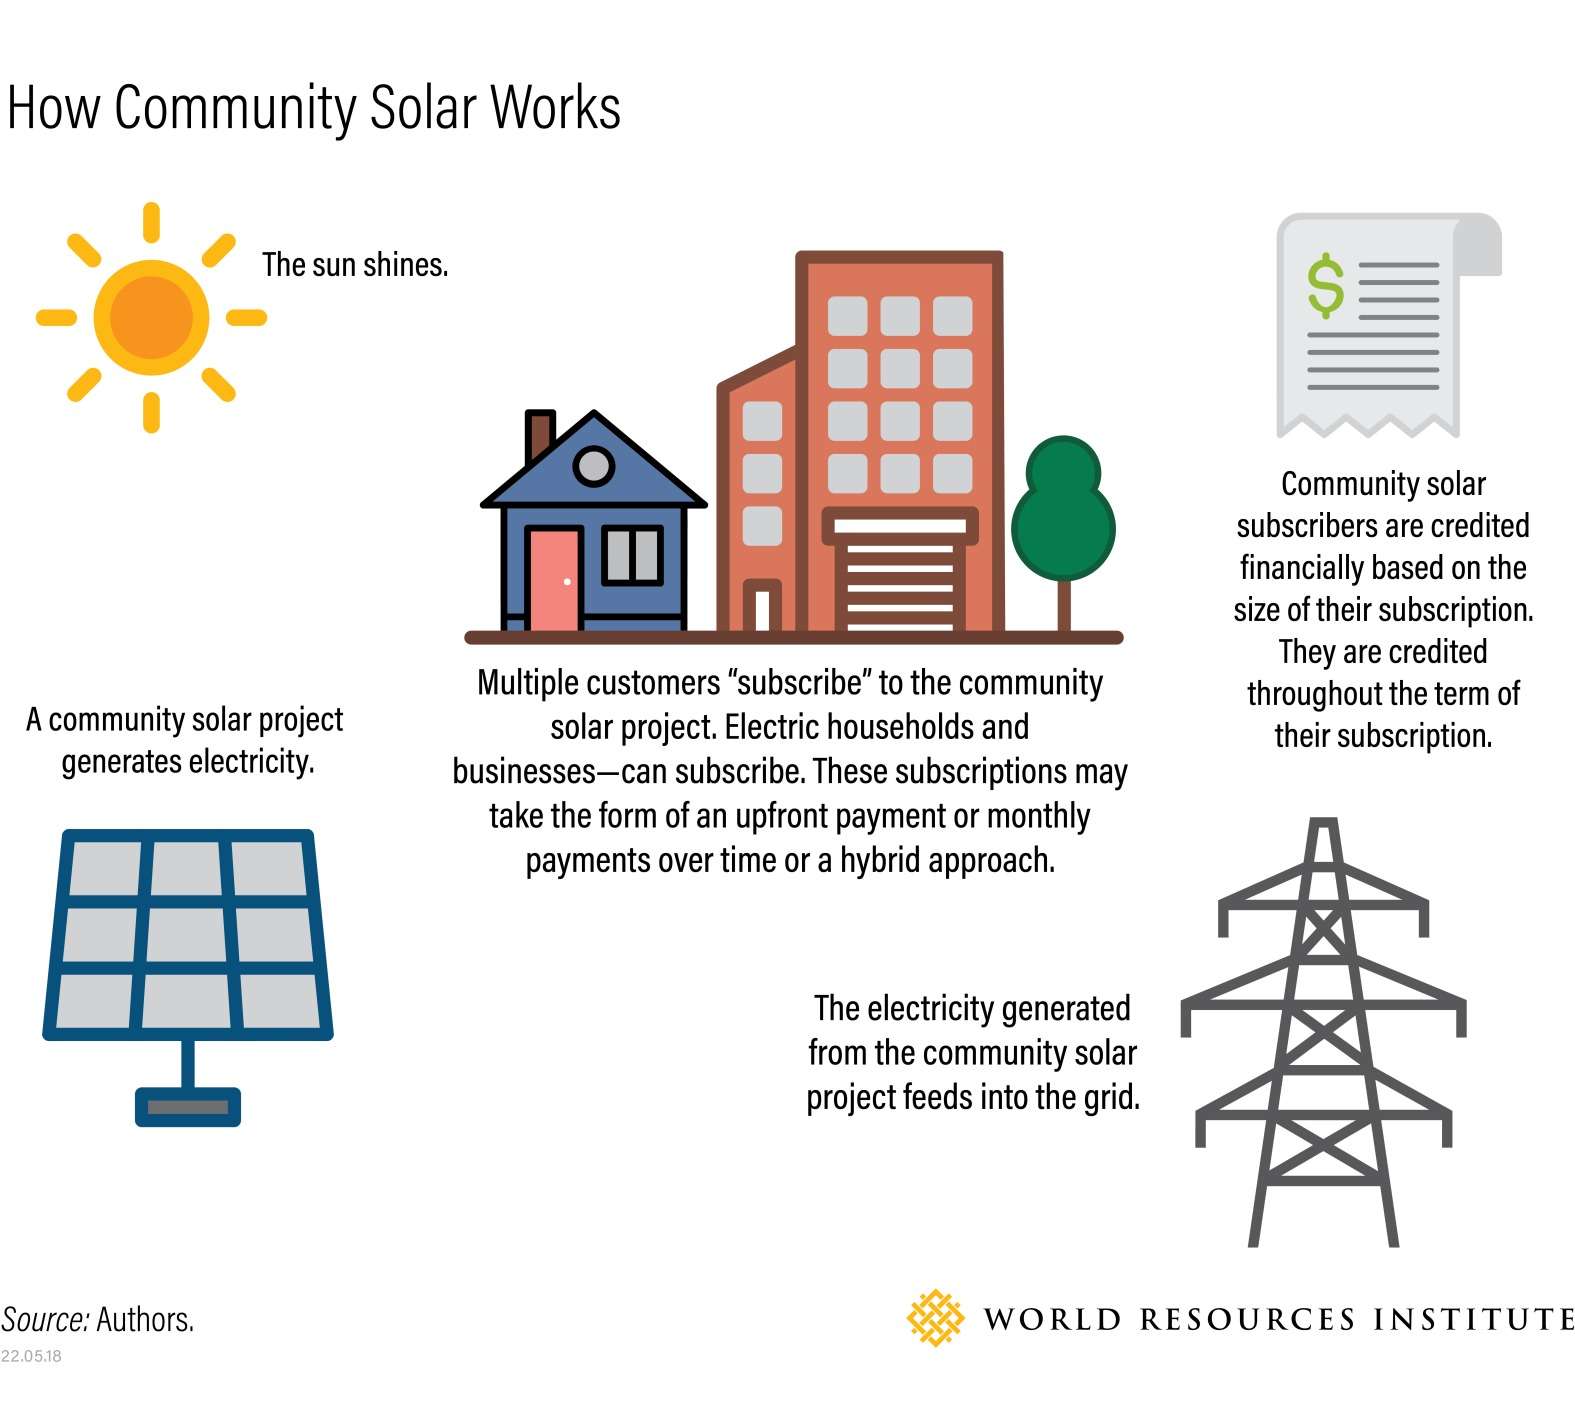 Community solar projects can benefit low- and moderate-income customers.